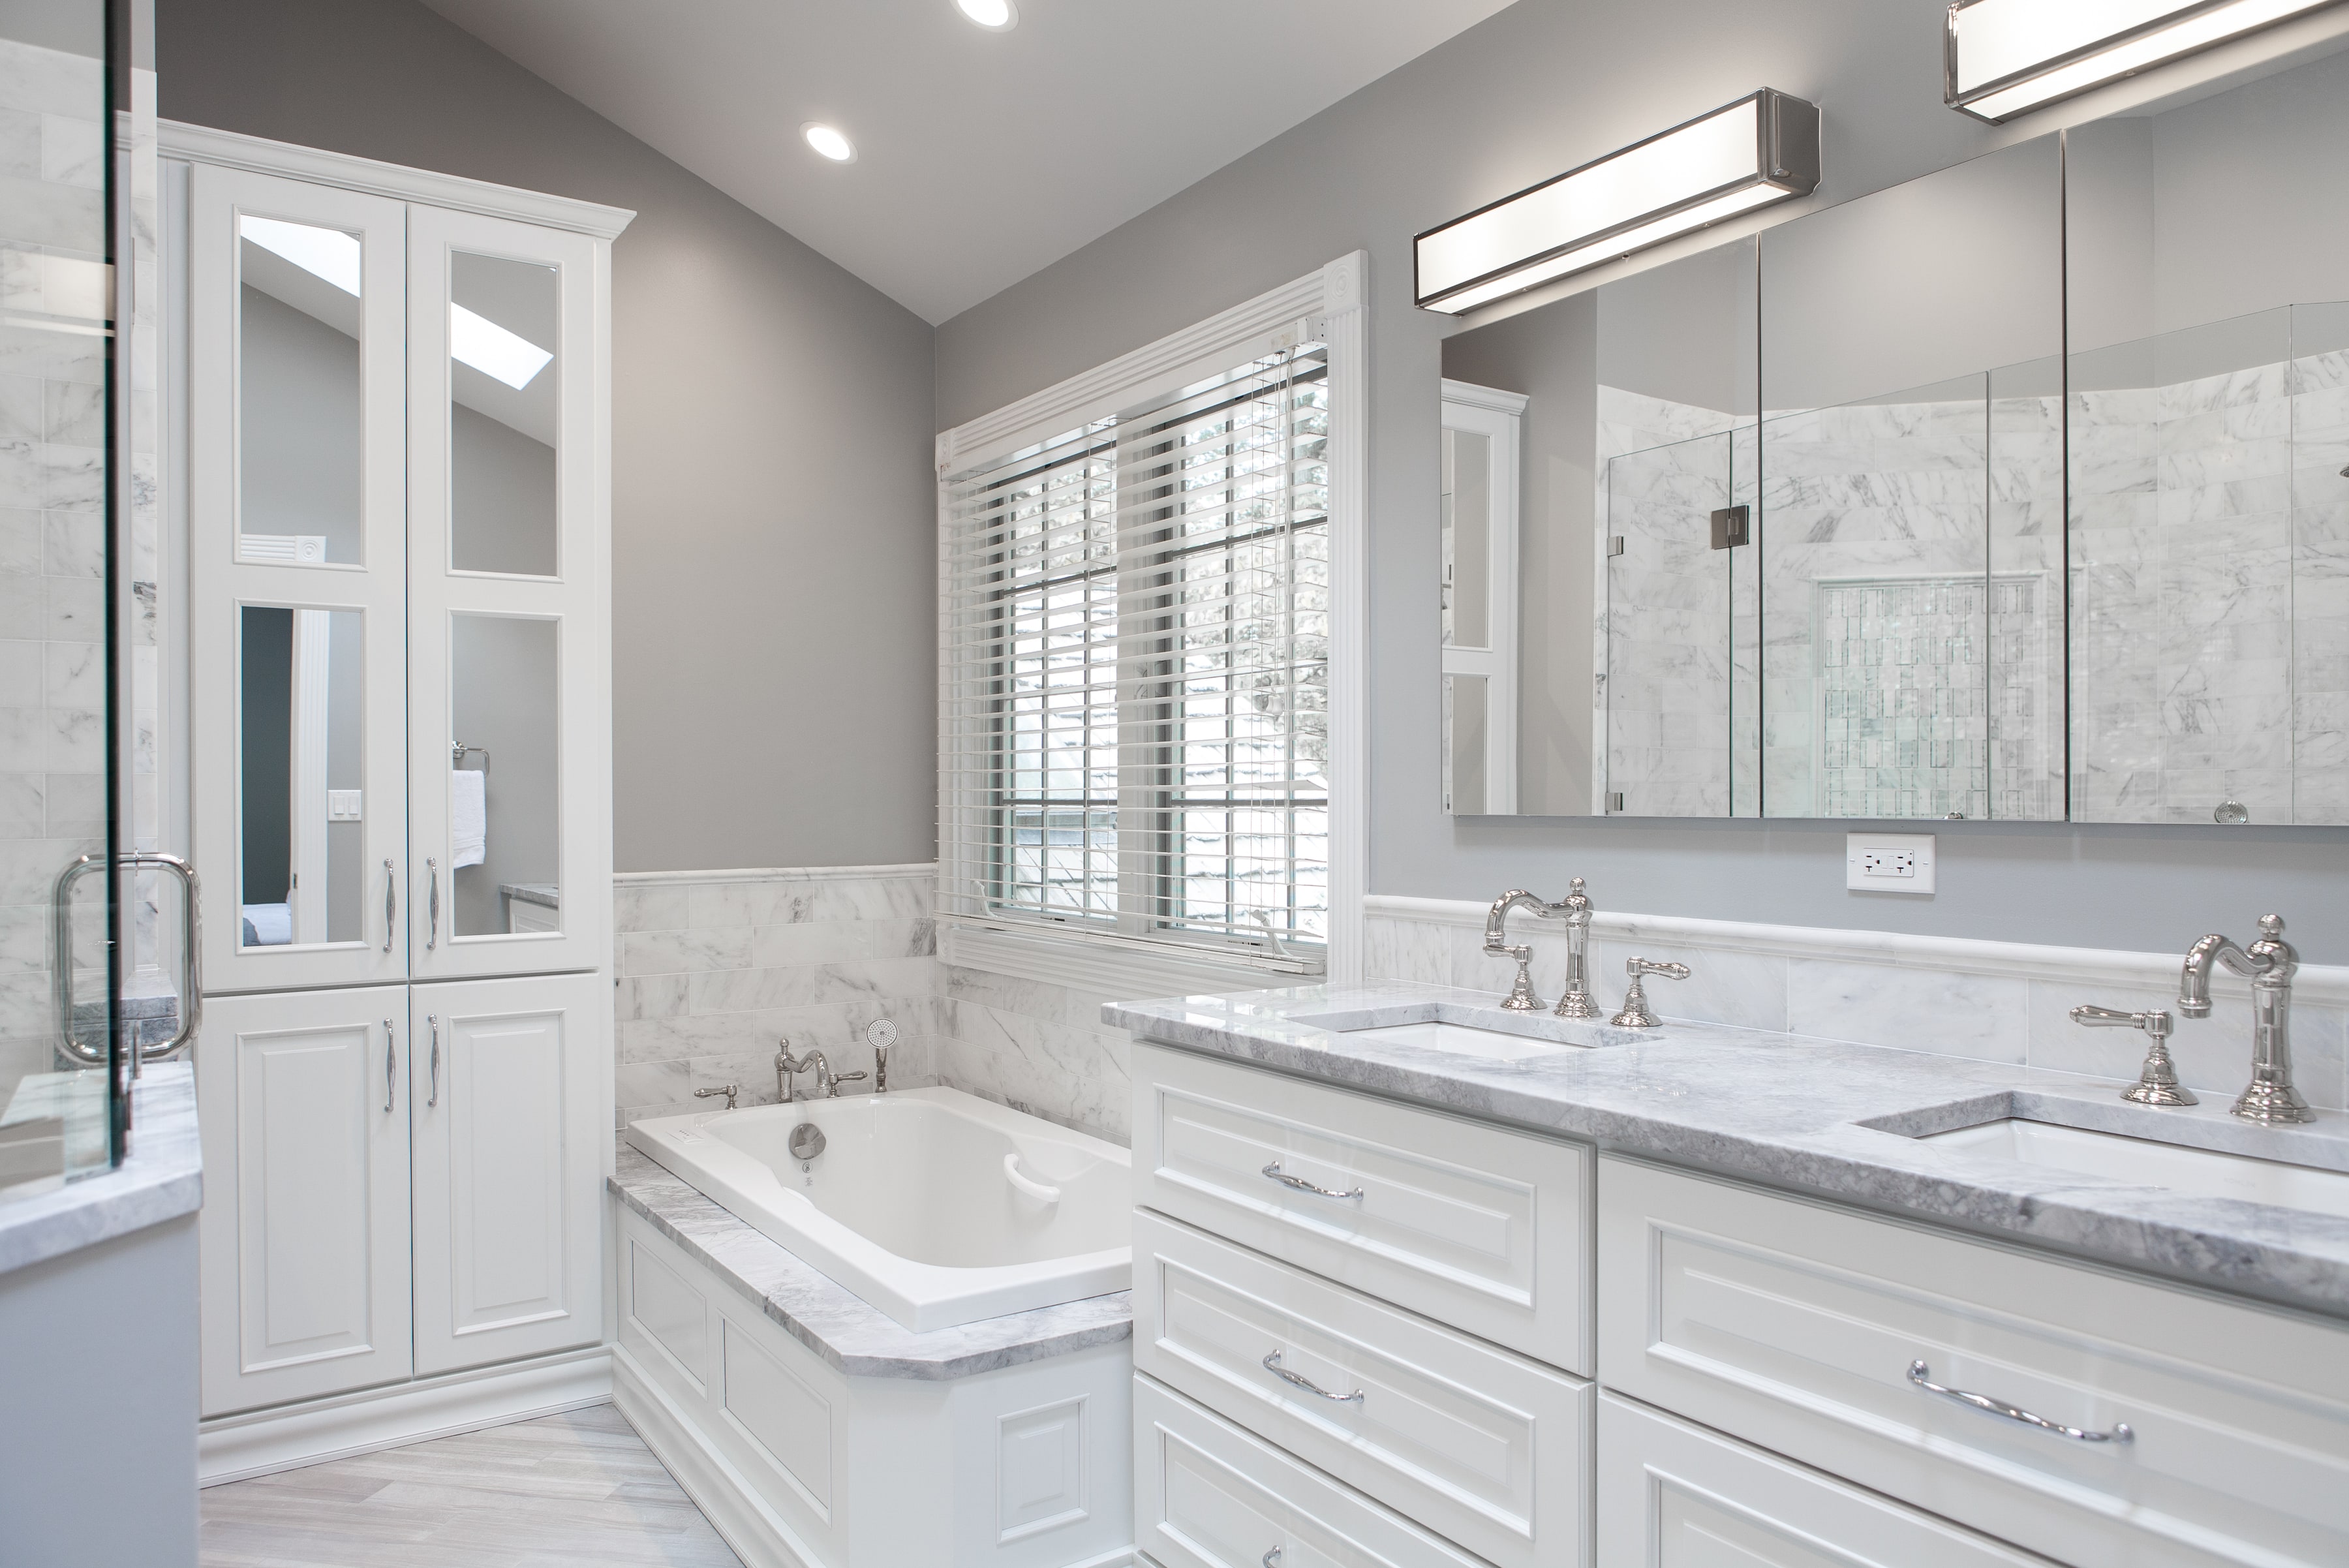 How Much Does a Bathroom Remodel Cost in the Chicago Area?